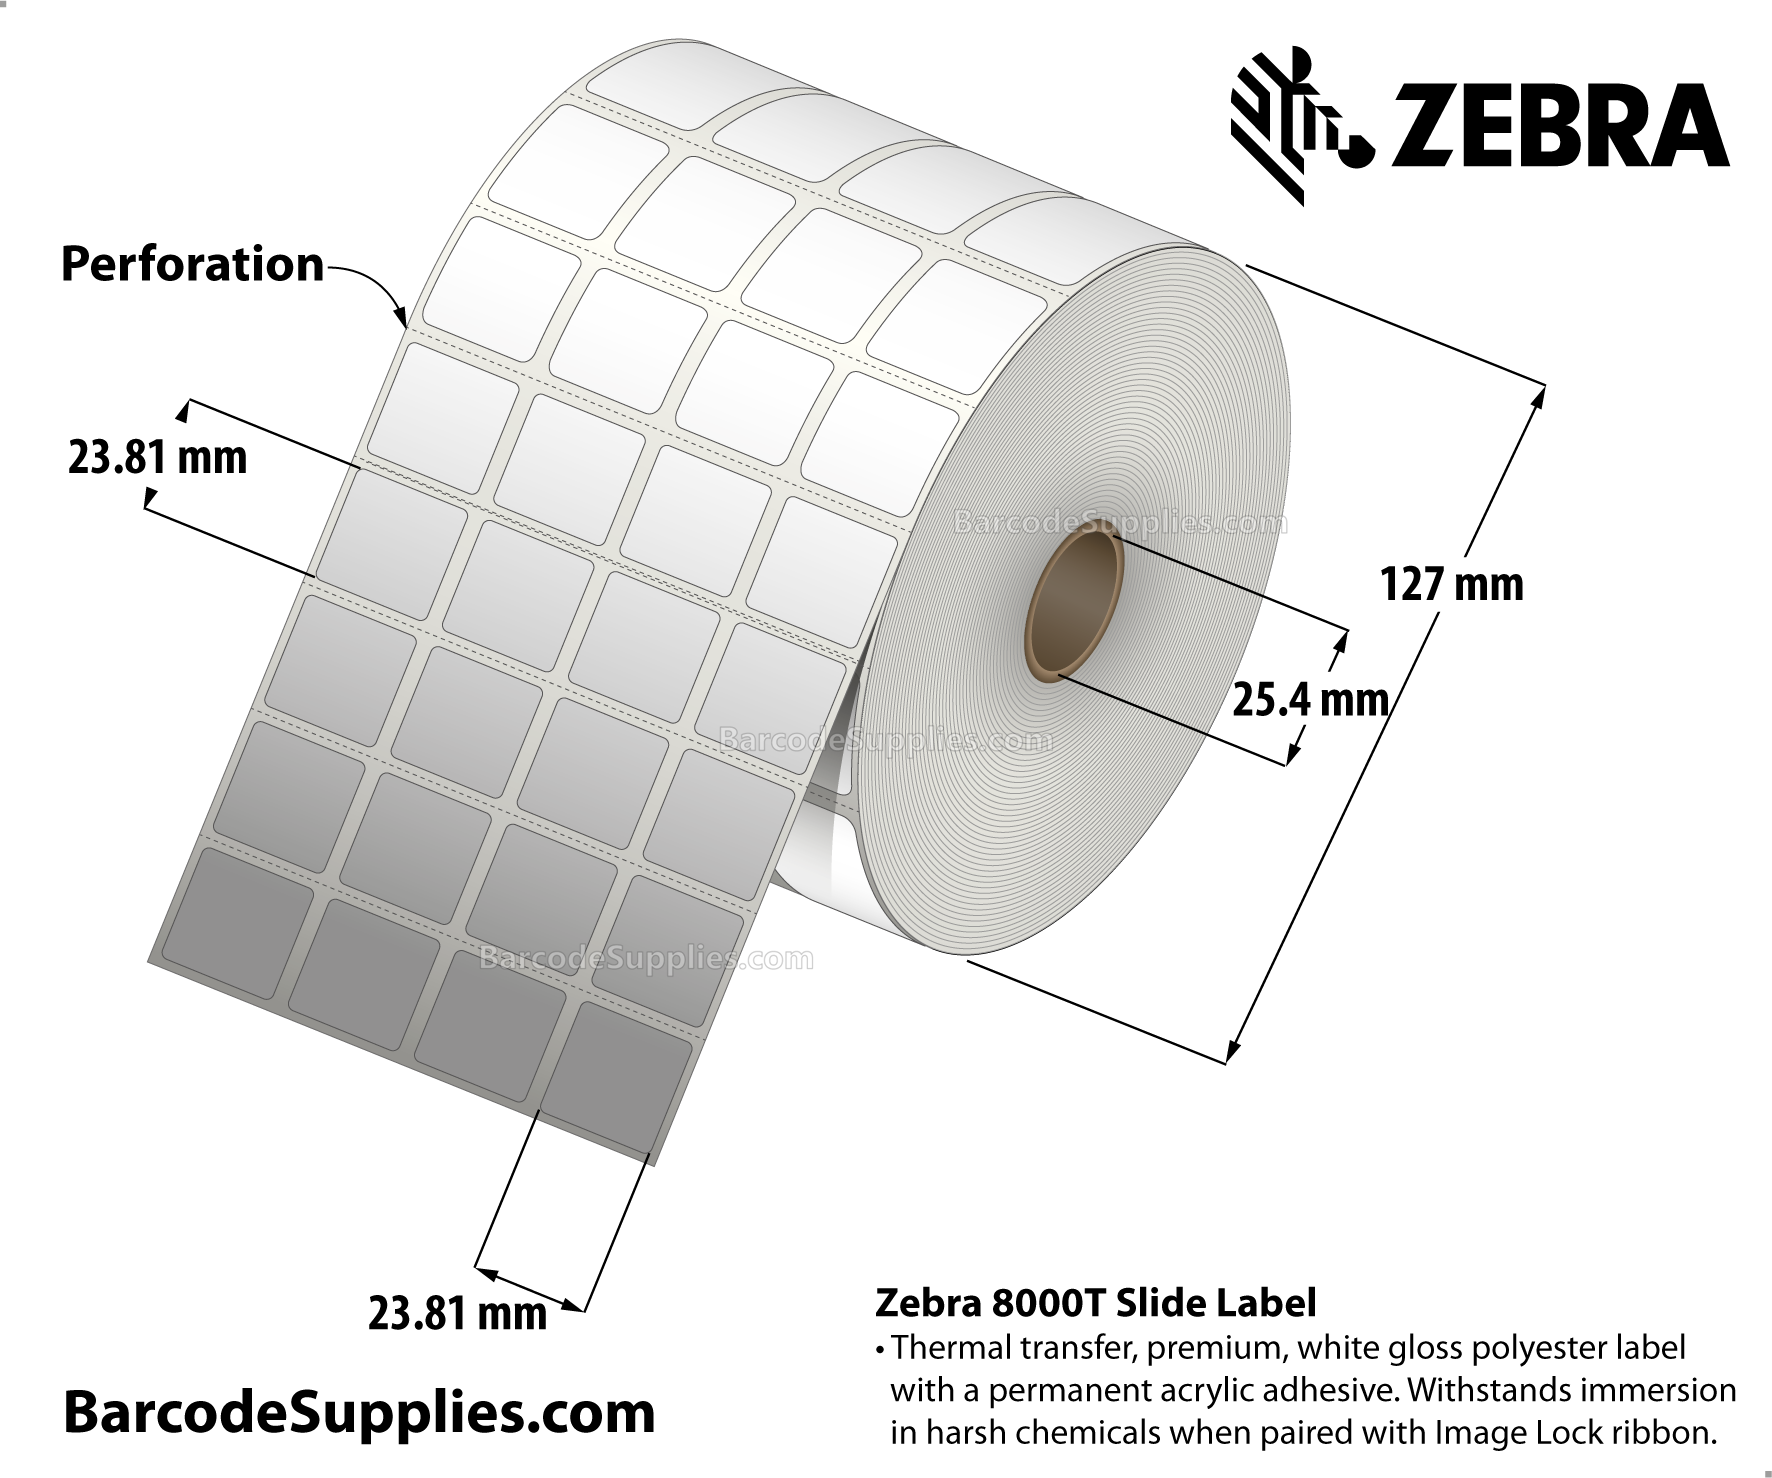 0.9375 x 0.9375 Thermal Transfer White 8000T Slide (4-Across) Labels With Permanent Adhesive - Perforated - 10048 Labels Per Roll - Carton Of 4 Rolls - 40192 Labels Total - MPN: 10034220